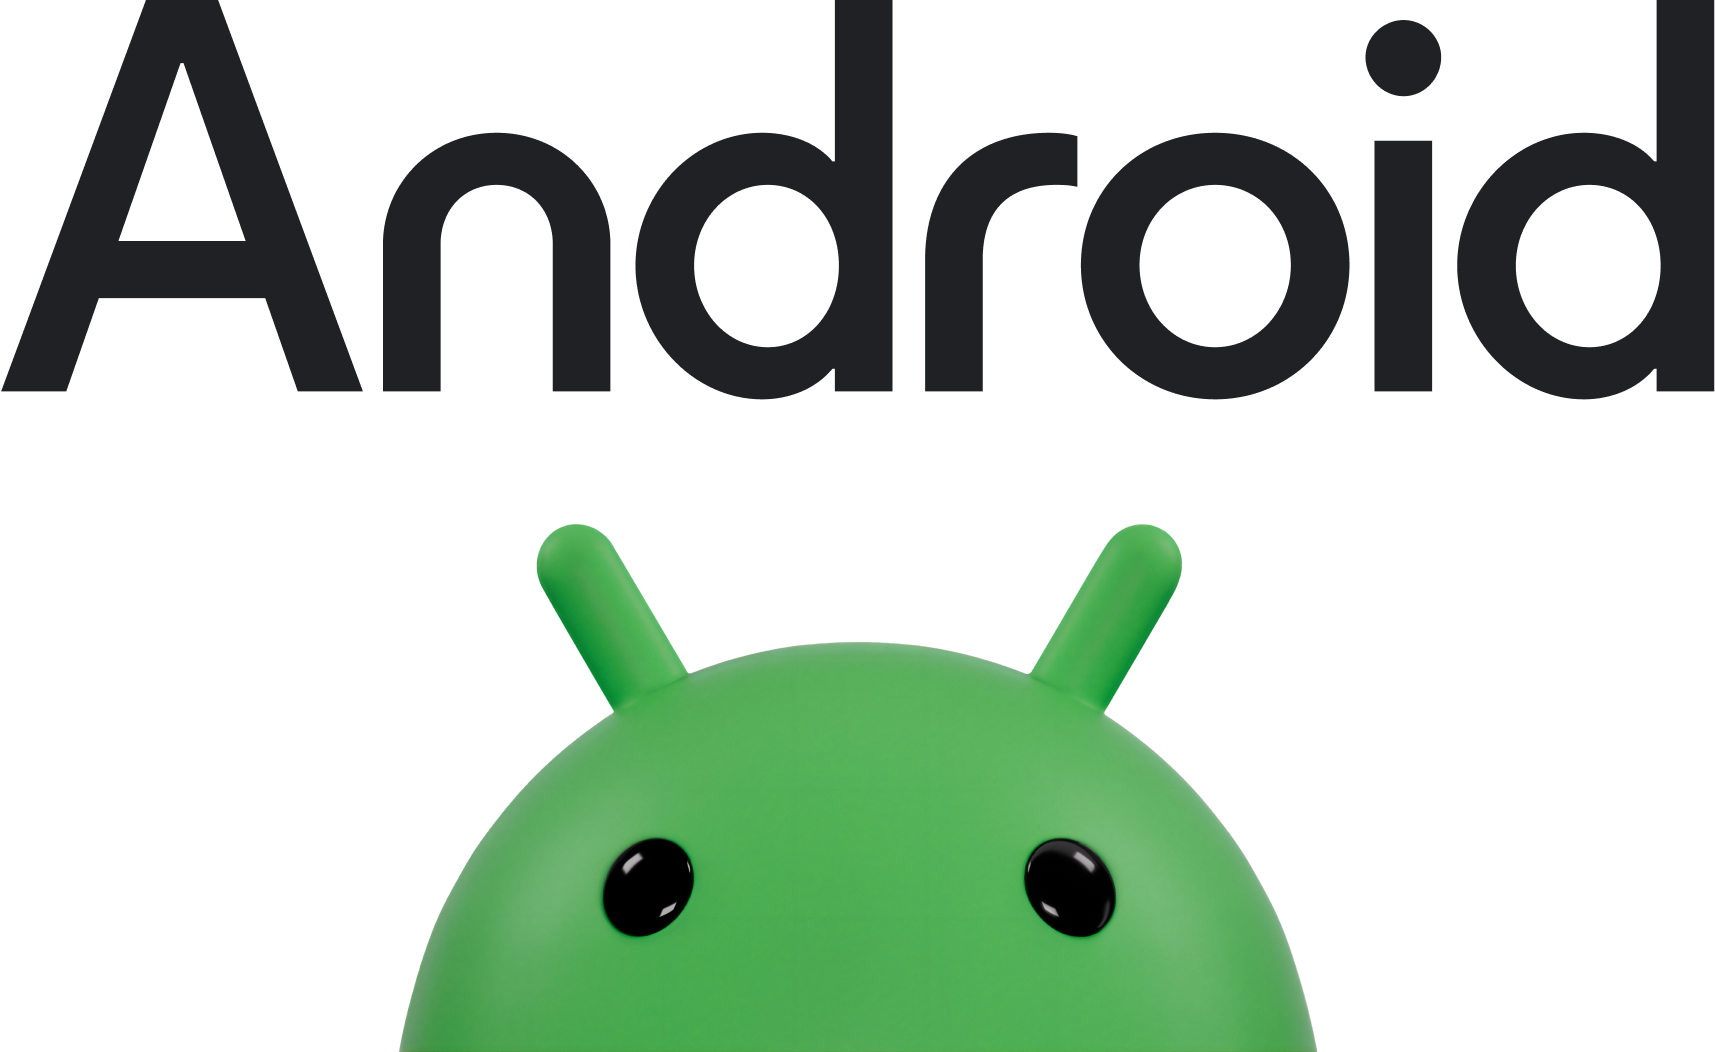 Android brand logo